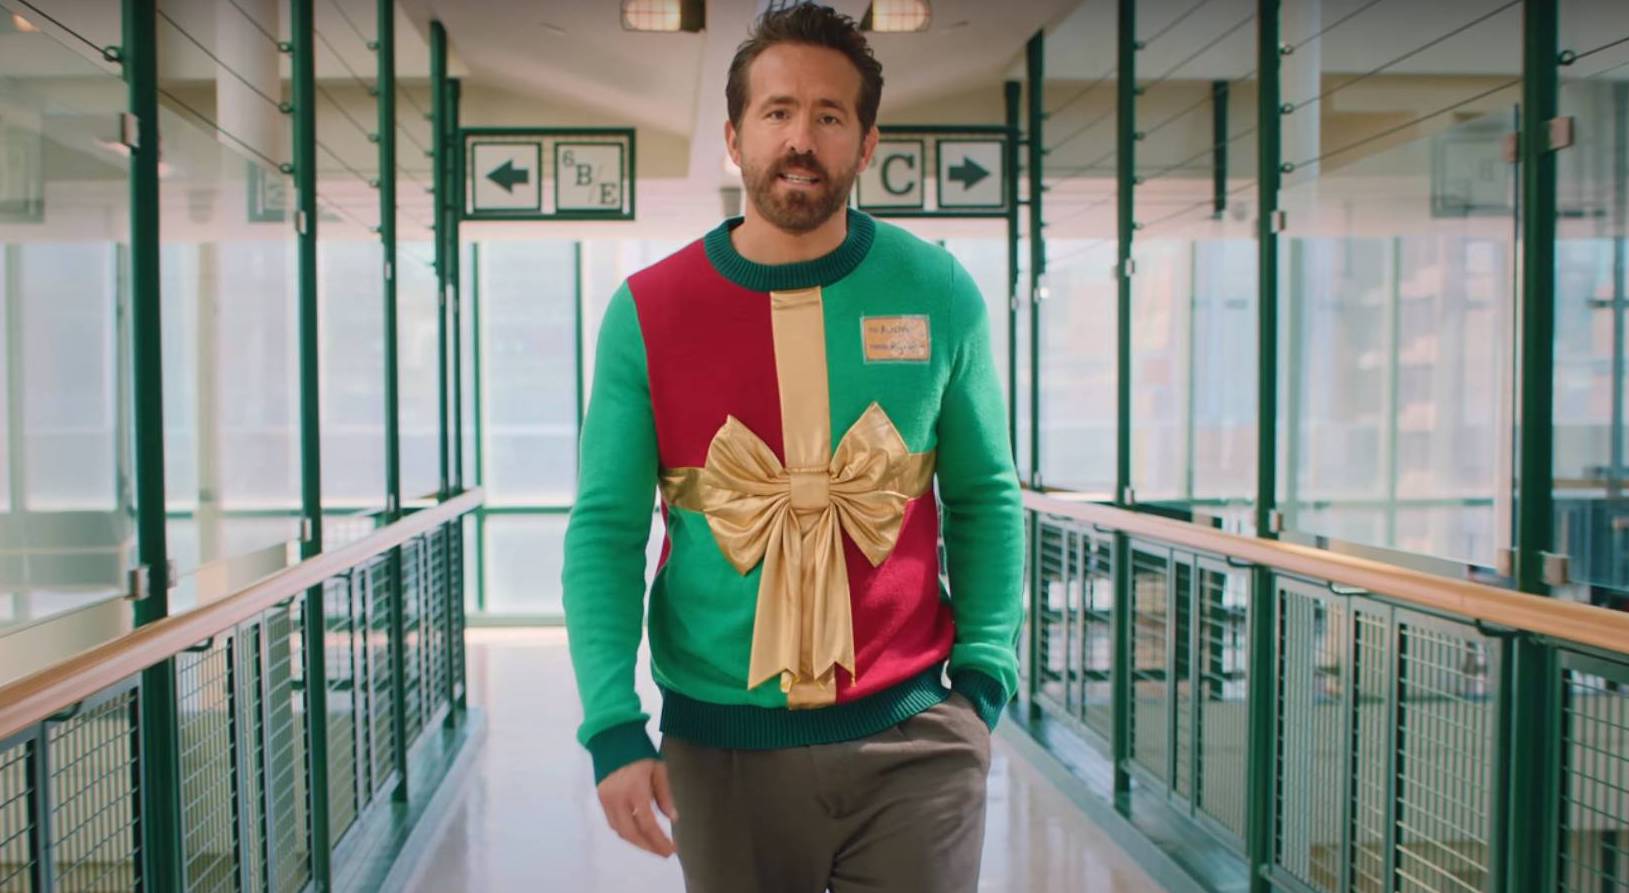 Man walking in a corridor wearing a festive holiday sweater with a large bow